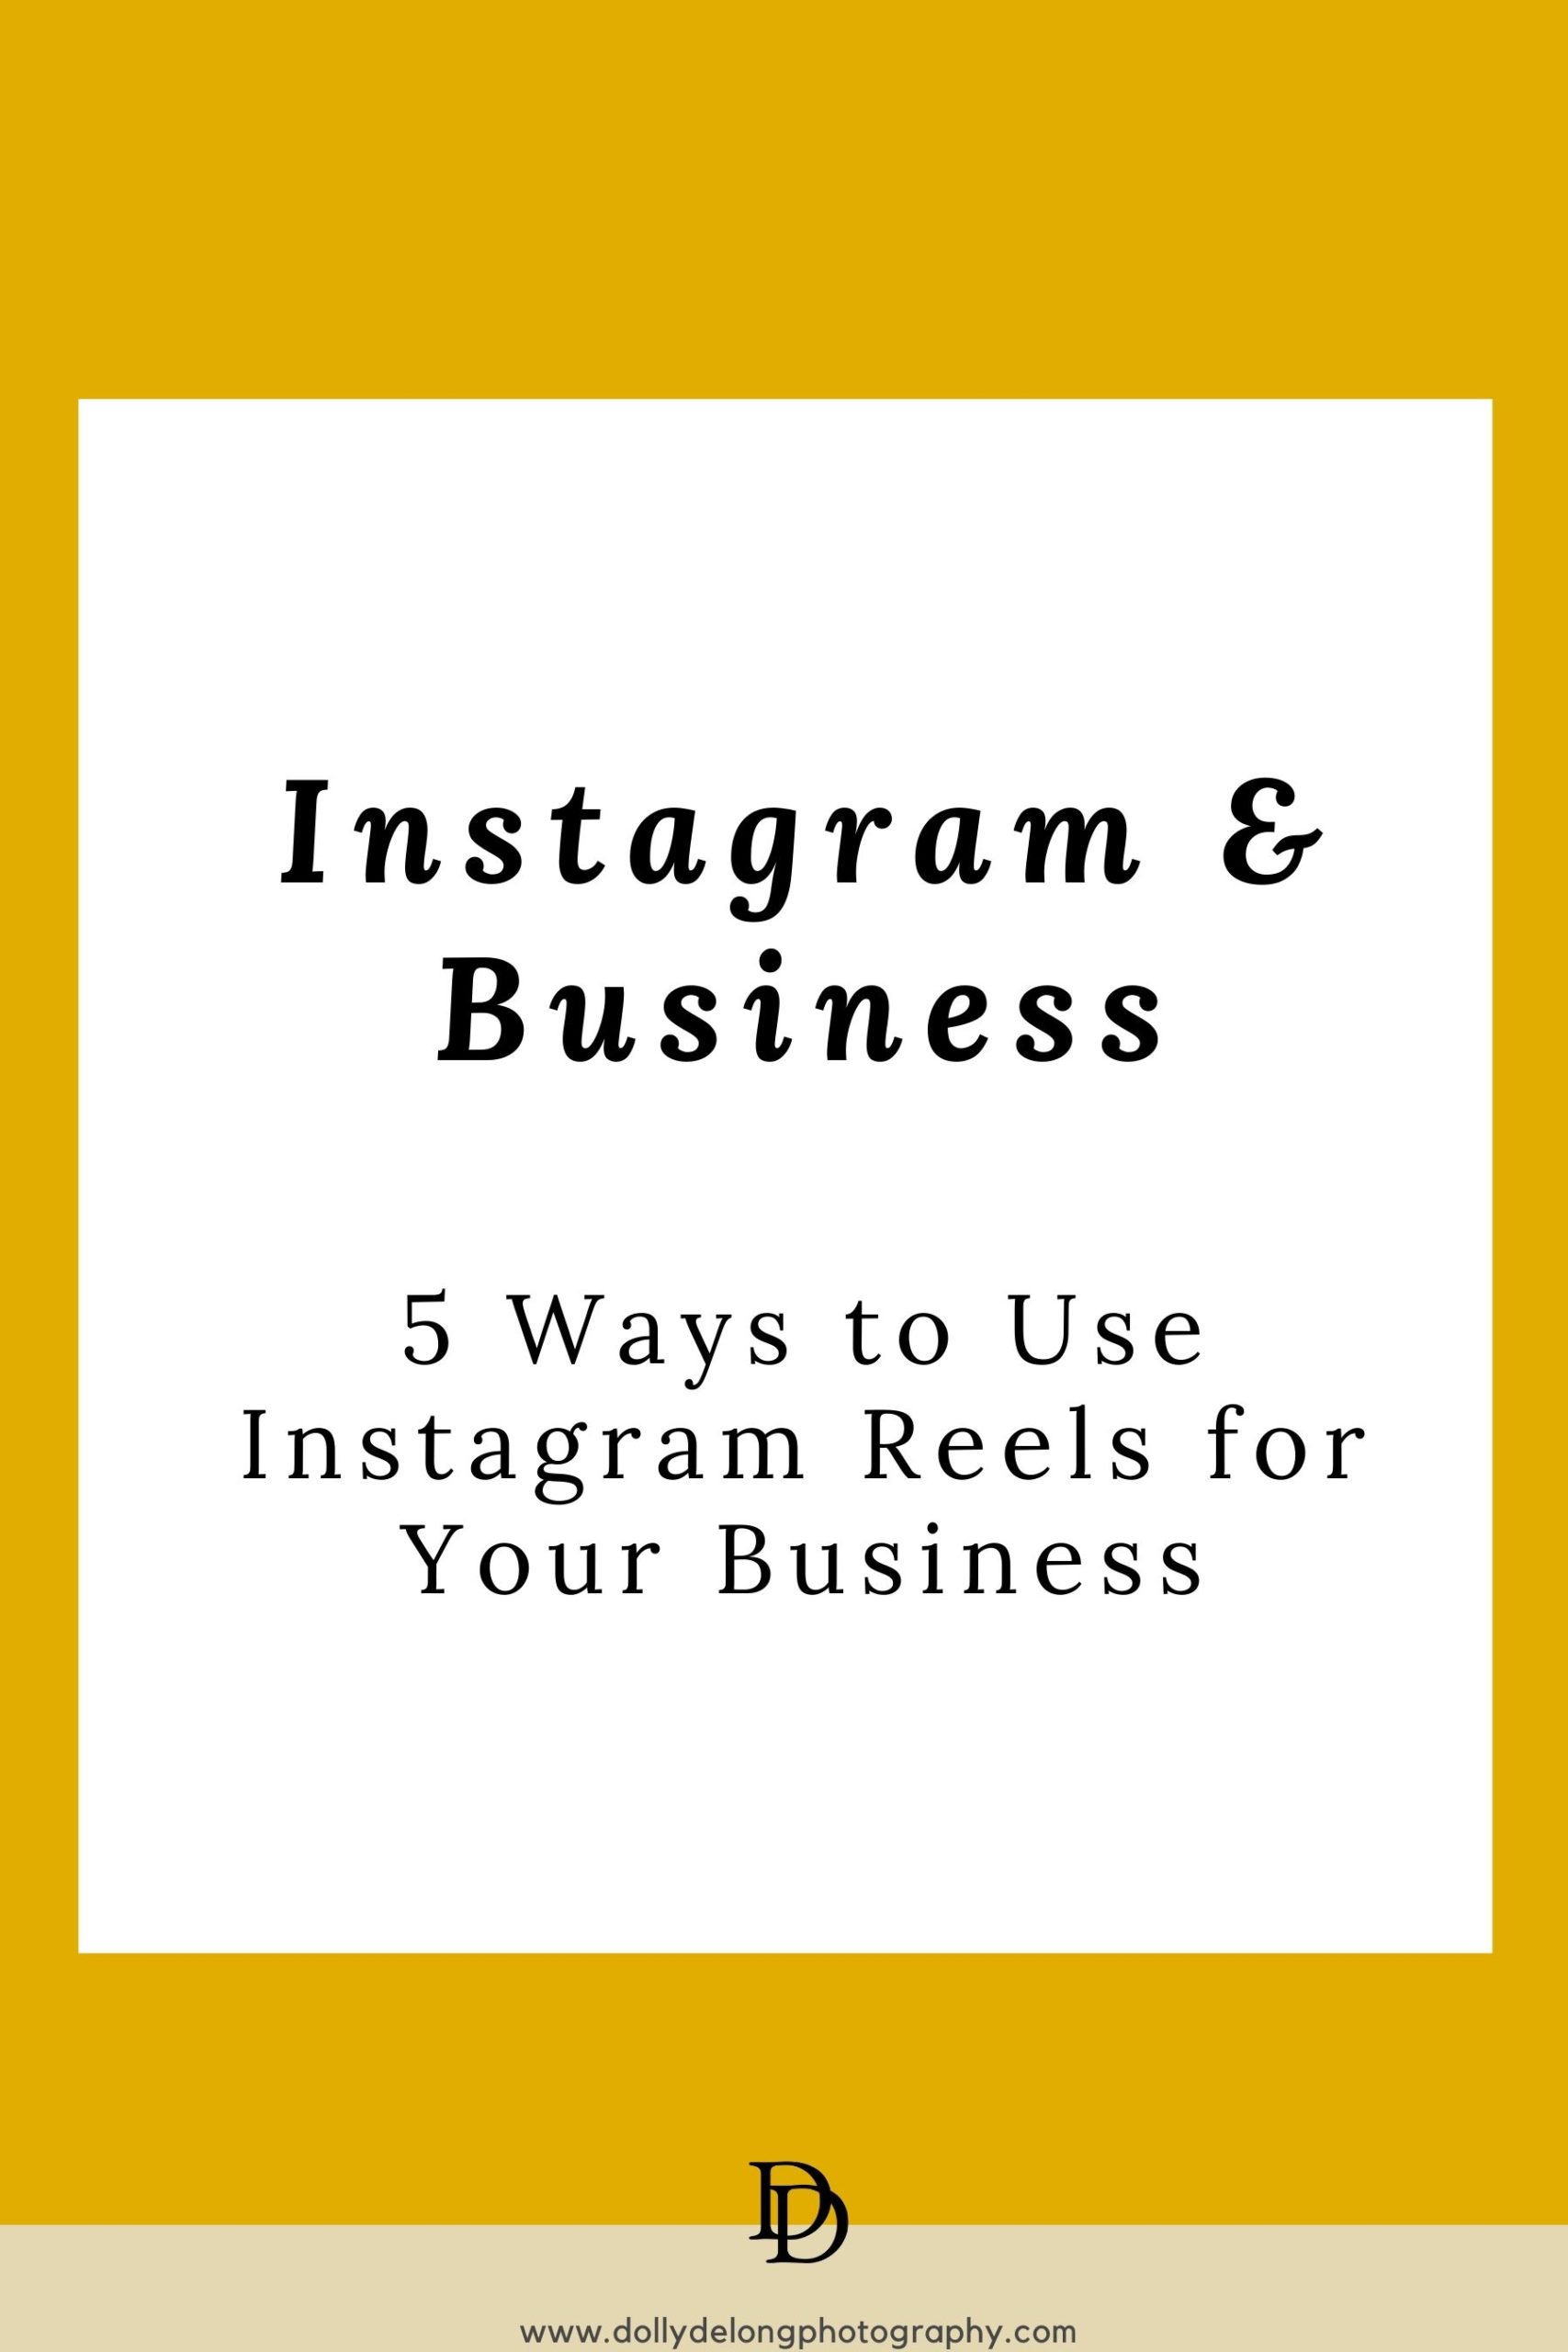 5 Ways to Use Instagram Reels for Your Business